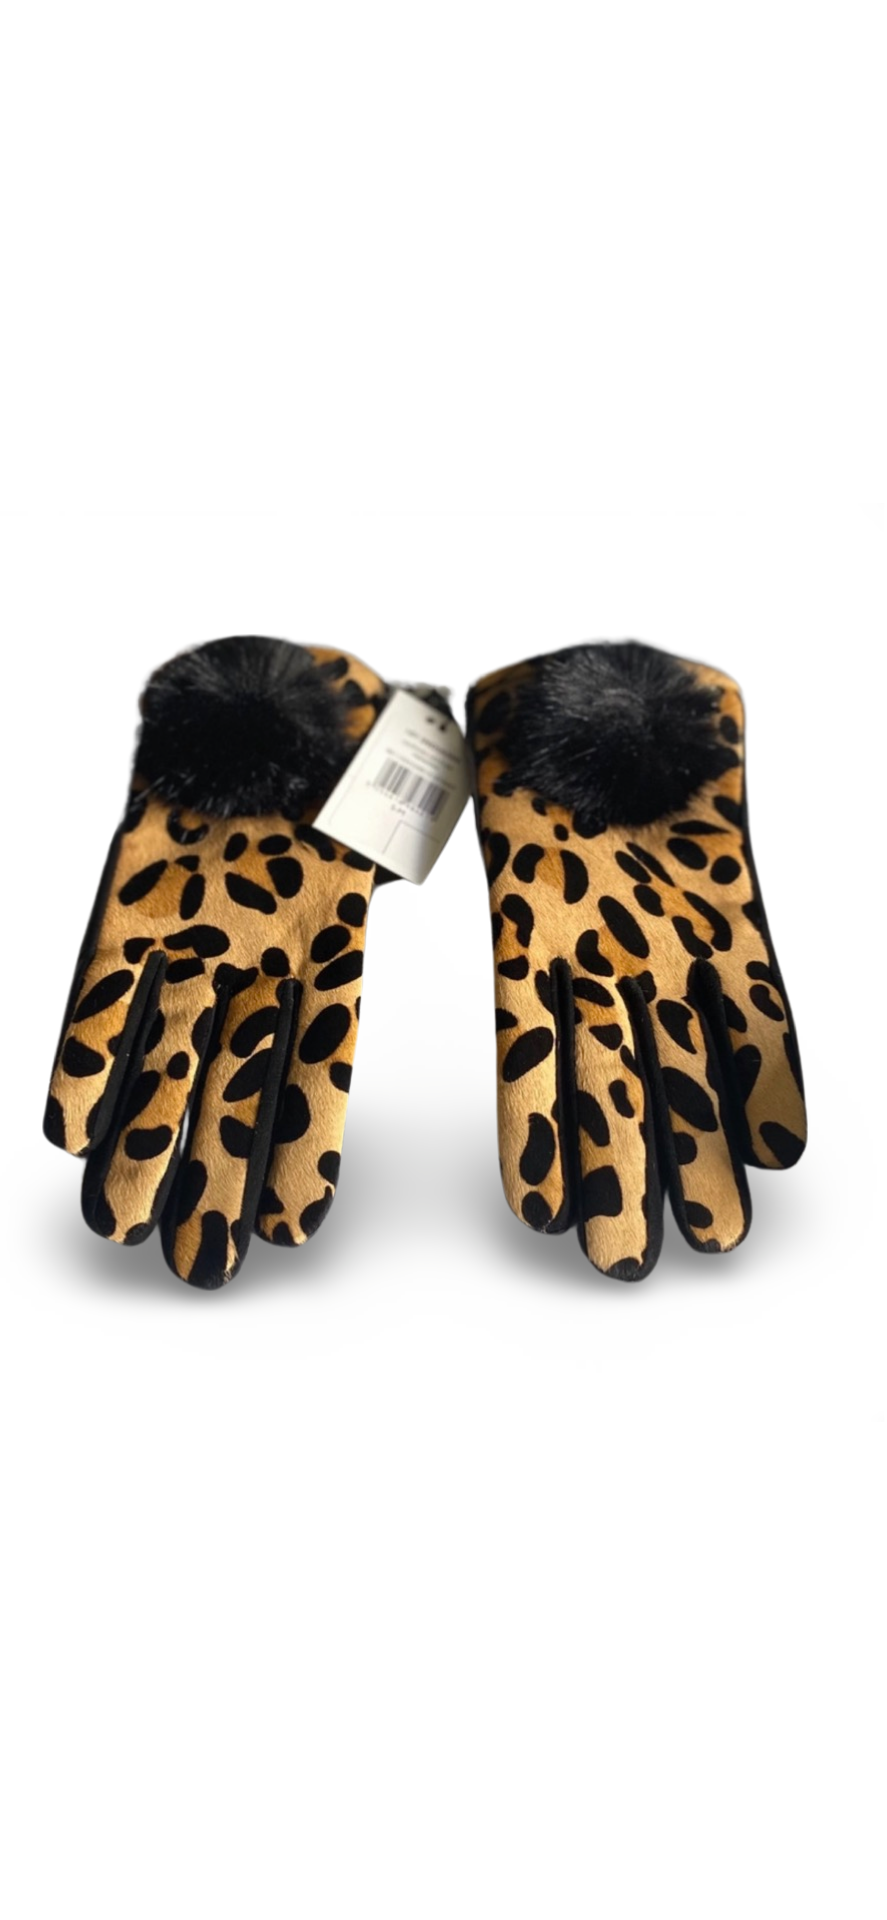 Dune Indiann Leather & Suede Gloves in Black Size S/M